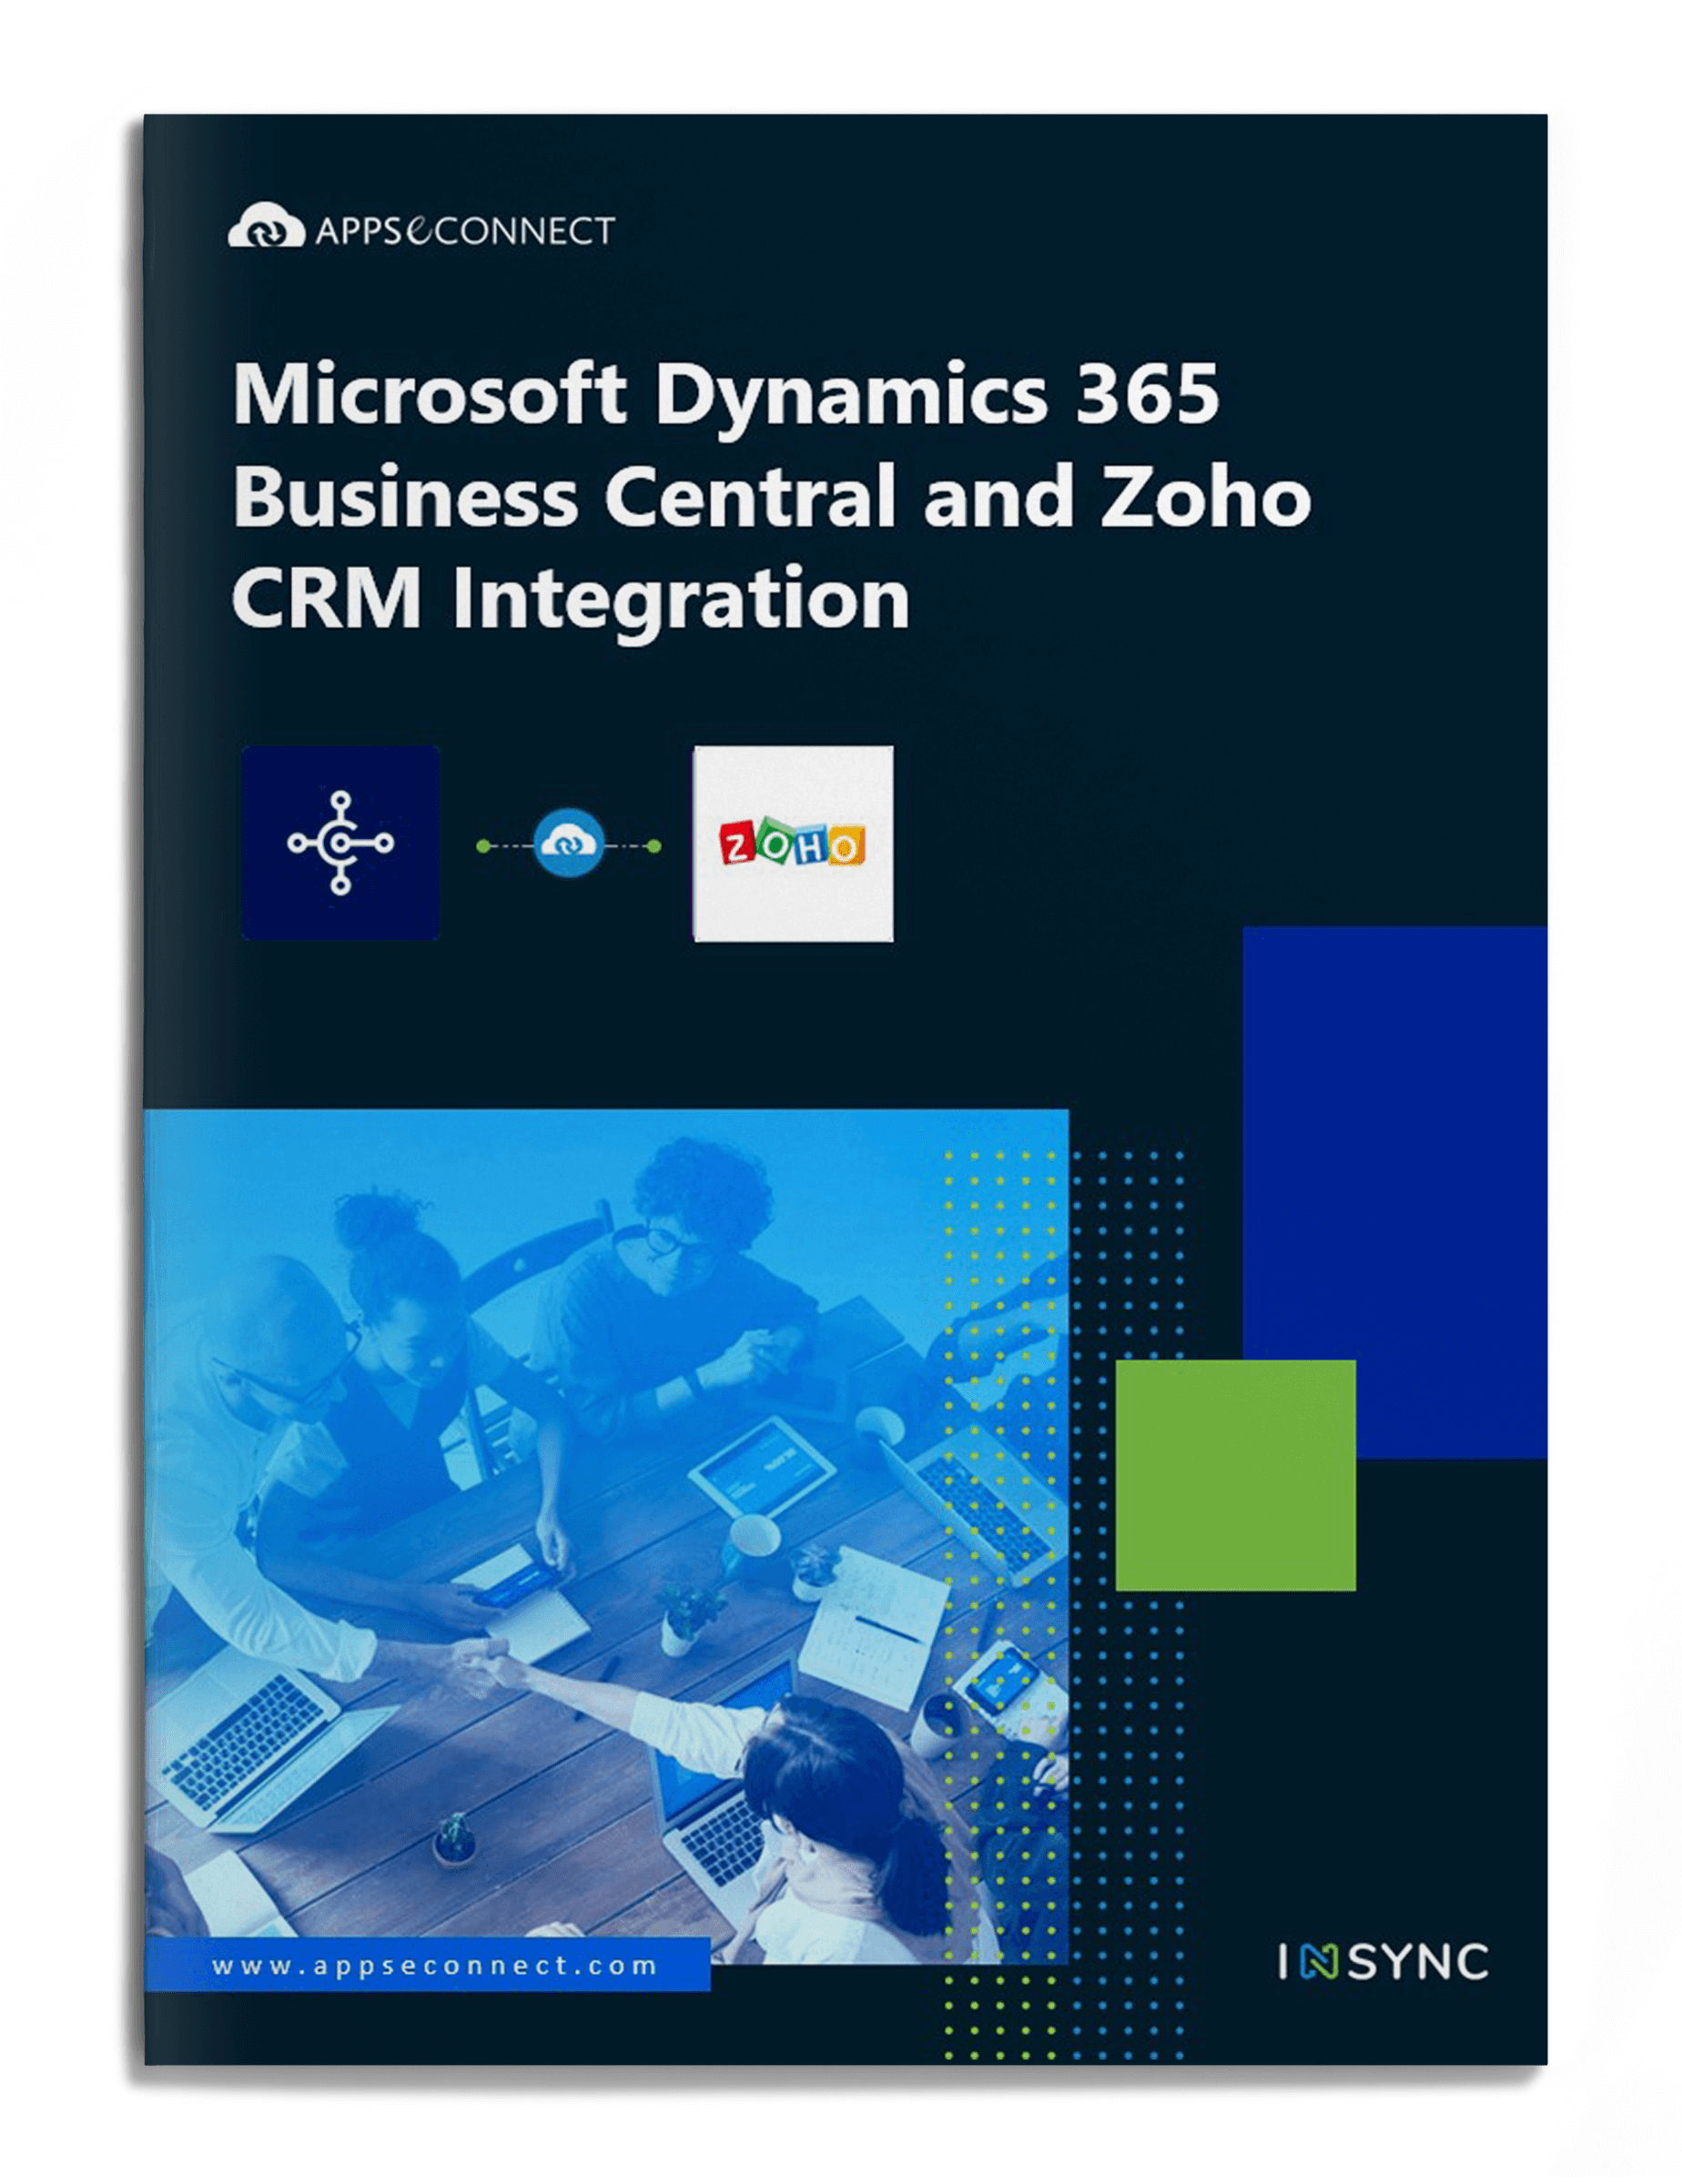 microsoft-dynamics-365-business-central-erp-zoho-crm-integration-brochure-cover